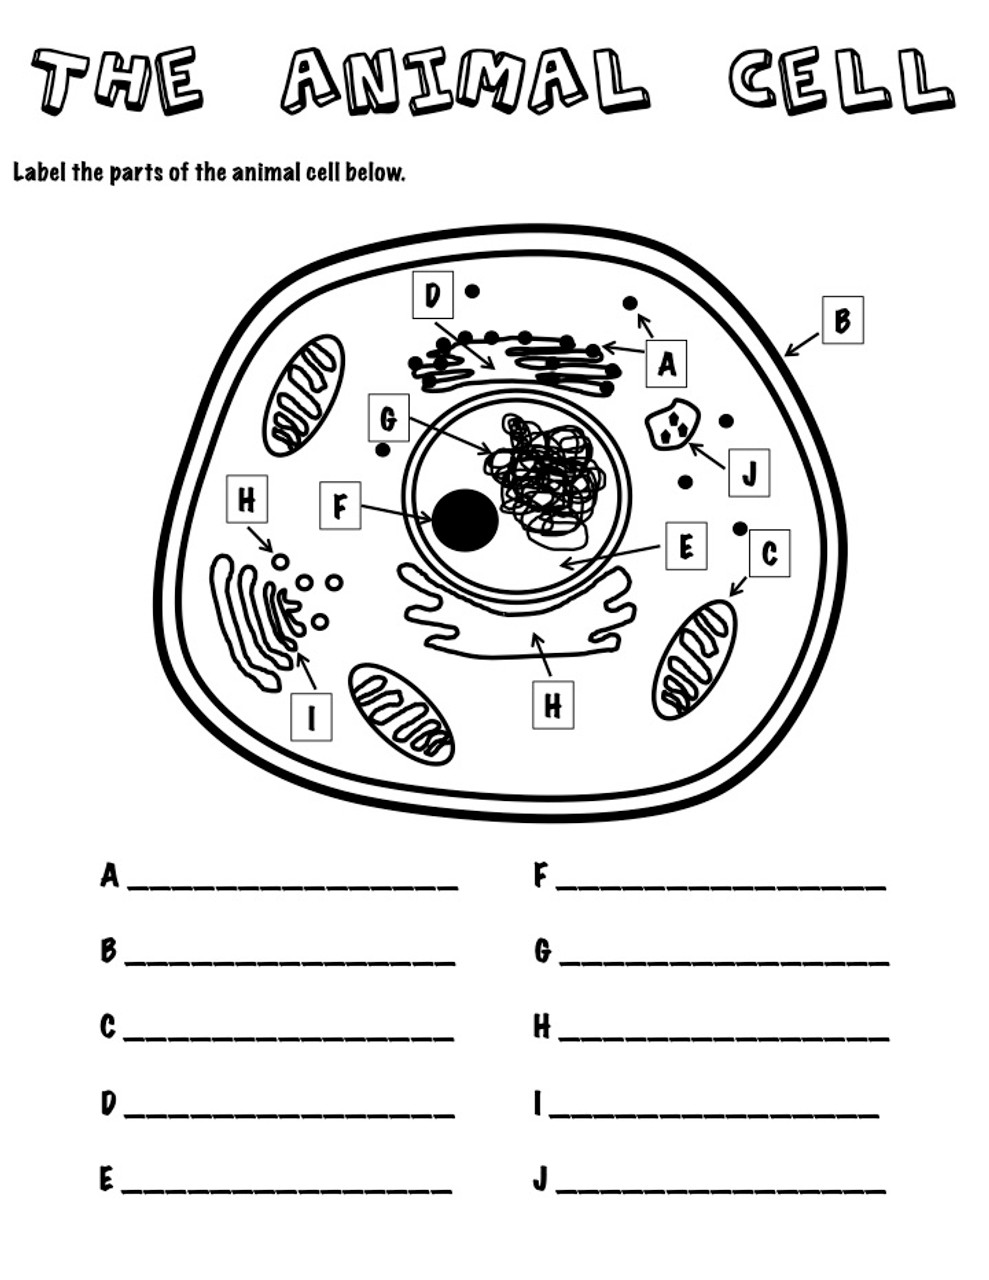 The Animal Cell Label